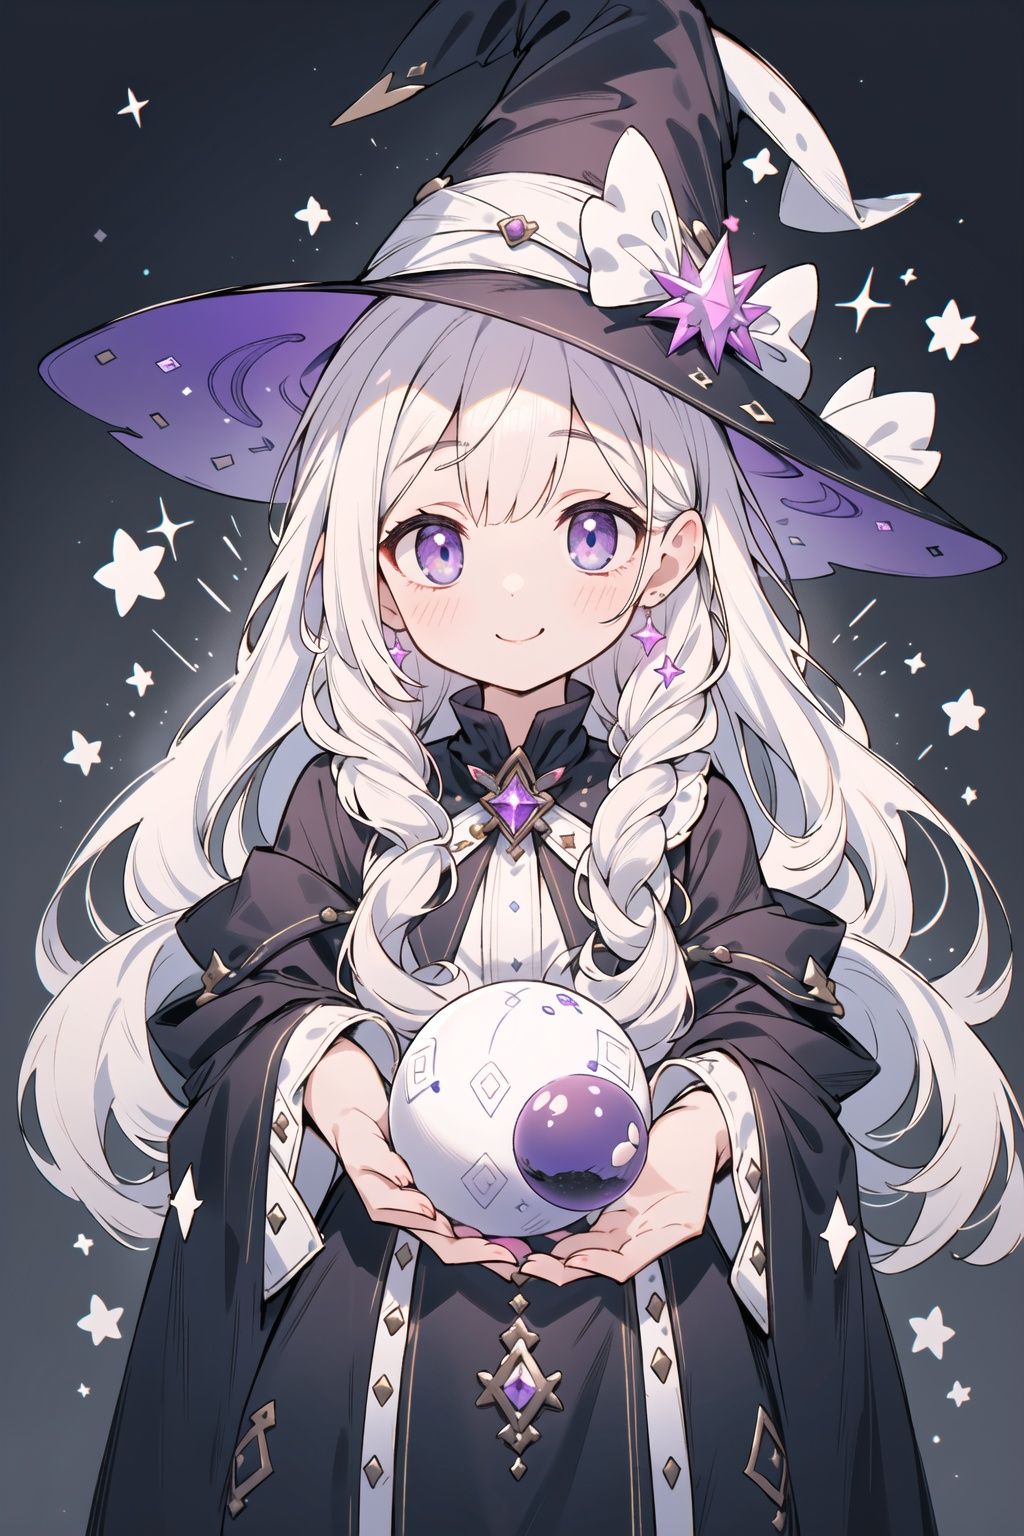 She is a cute magician girl, with a head of soft purple long hair, paired with a black pointed hat. Her eyes are deep purple, shining with curiosity and wisdom. She has two small dimples on her cheeks, which make her look very cute when she smiles. She wears a black robe, embroidered with various mysterious symbols and patterns. She holds a white wand in her hand, and there is a purple crystal ball at the top of the wand, which flickers with magic. She is a kind and brave magician girl, who always uses her magic to bring happiness and joy to people.